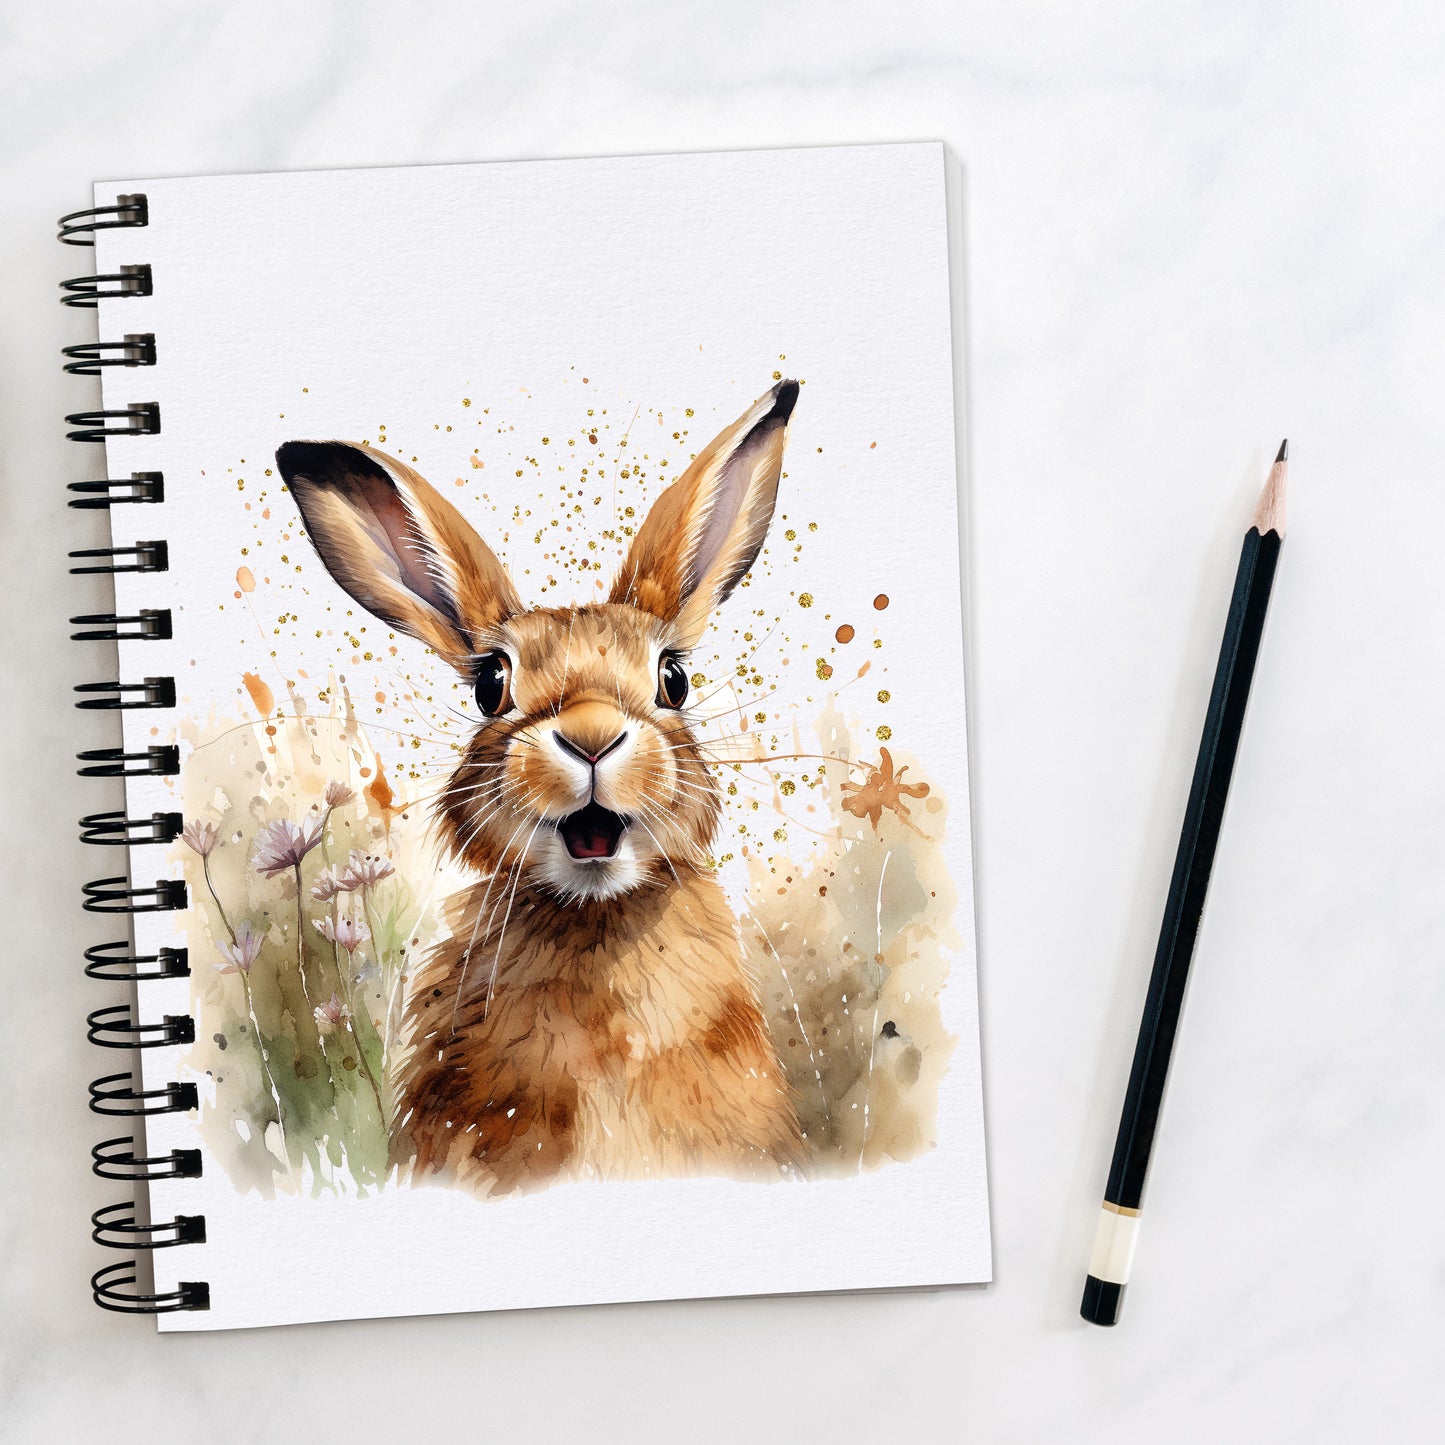 Hare Spiral Bound Note Book | Hare Note book